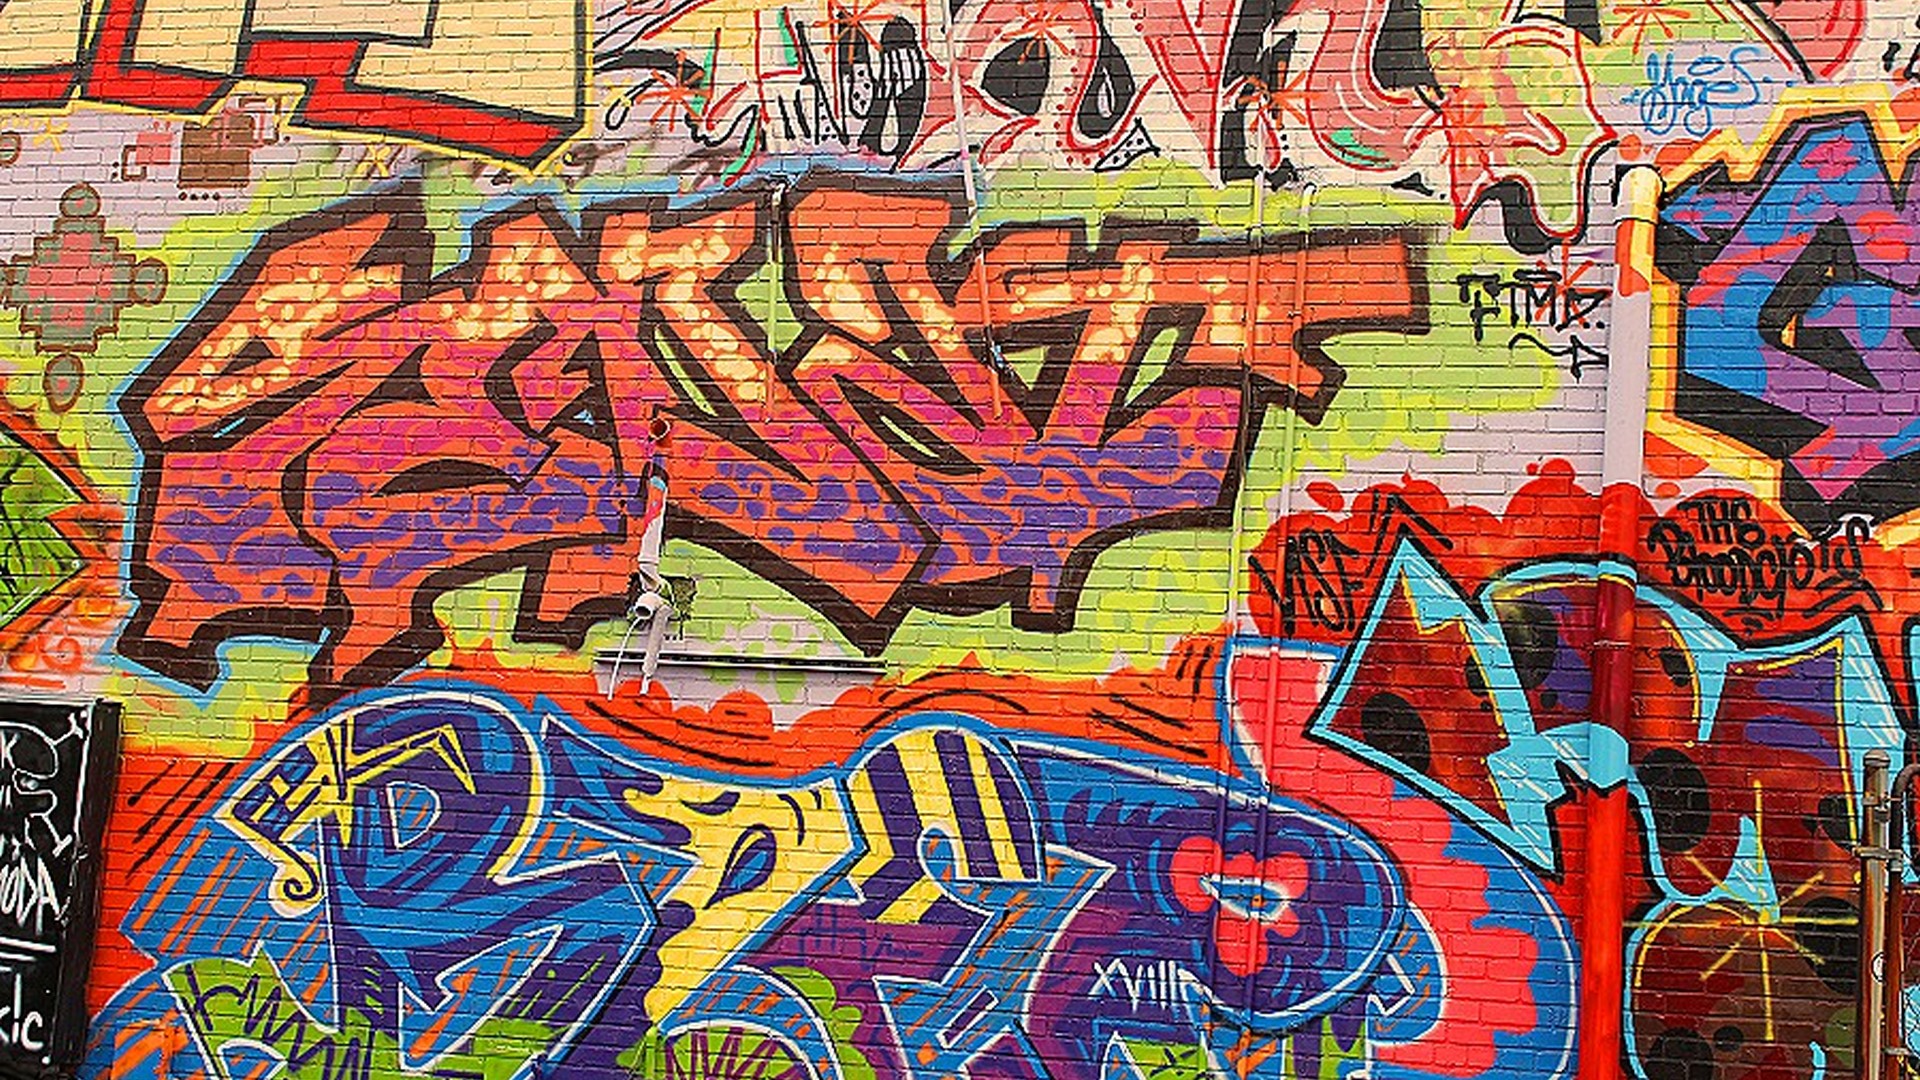 Graffiti Letters Background Wallpaper HD With Resolution 1920X1080 pixel. You can make this wallpaper for your Desktop Computer Backgrounds, Mac Wallpapers, Android Lock screen or iPhone Screensavers